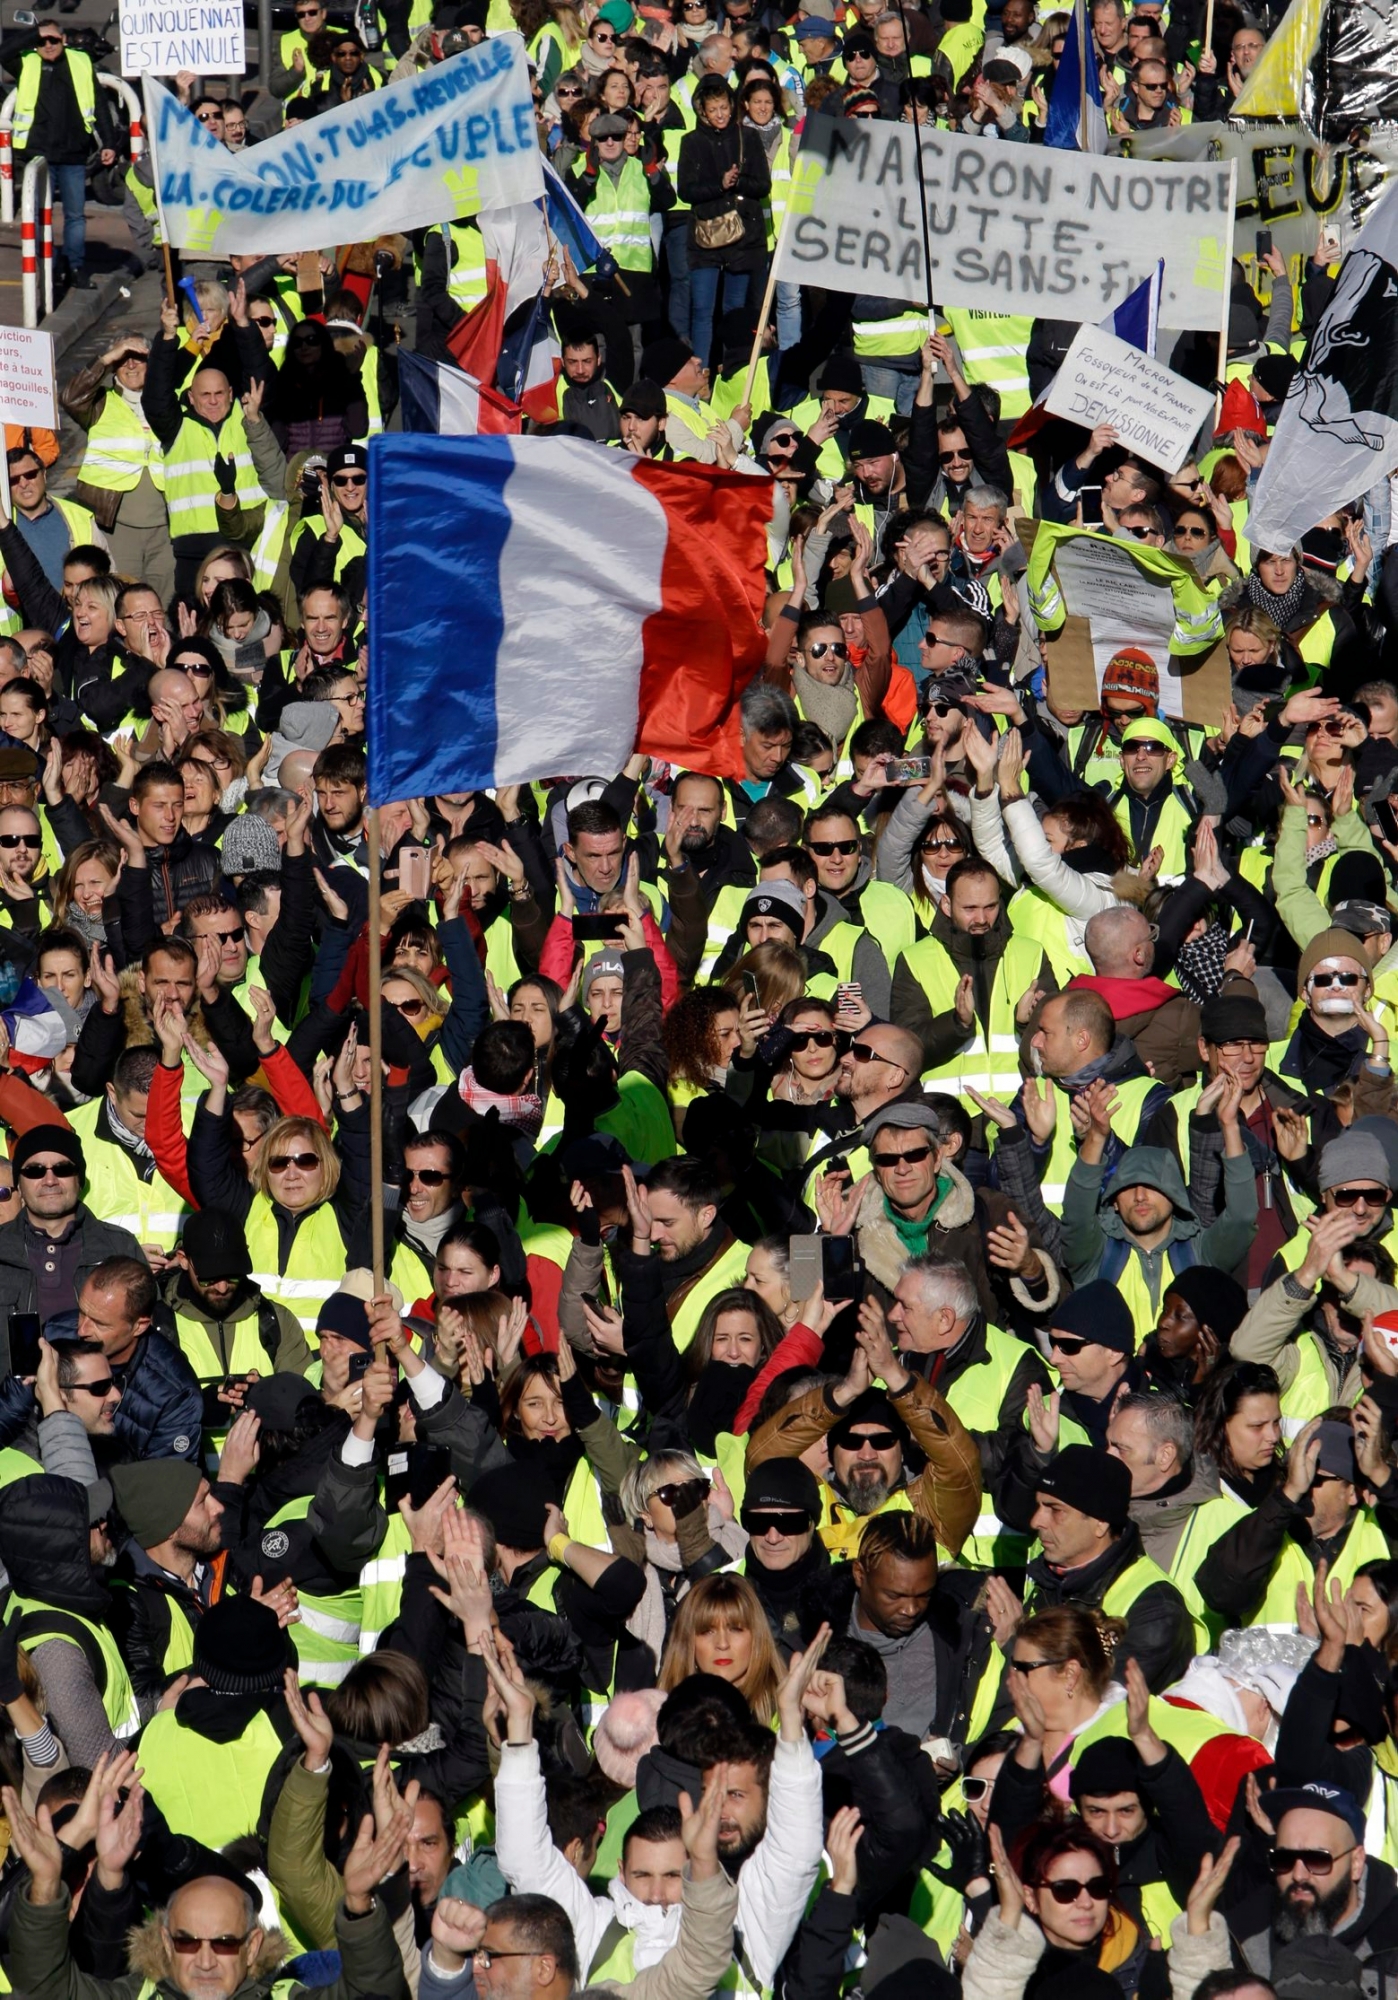 People demonstrate Saturday, Dec. 15, 2018 in Marseille, southern France. Paris police deployed in large numbers Saturday for the fifth straight weekend of demonstrations by the "yellow vest" protesters, with authorities repeating calls for calm after protests on previous weekends turned violent. At least 21 people were detained beforehand. (AP Photo/Claude Paris) France Protests